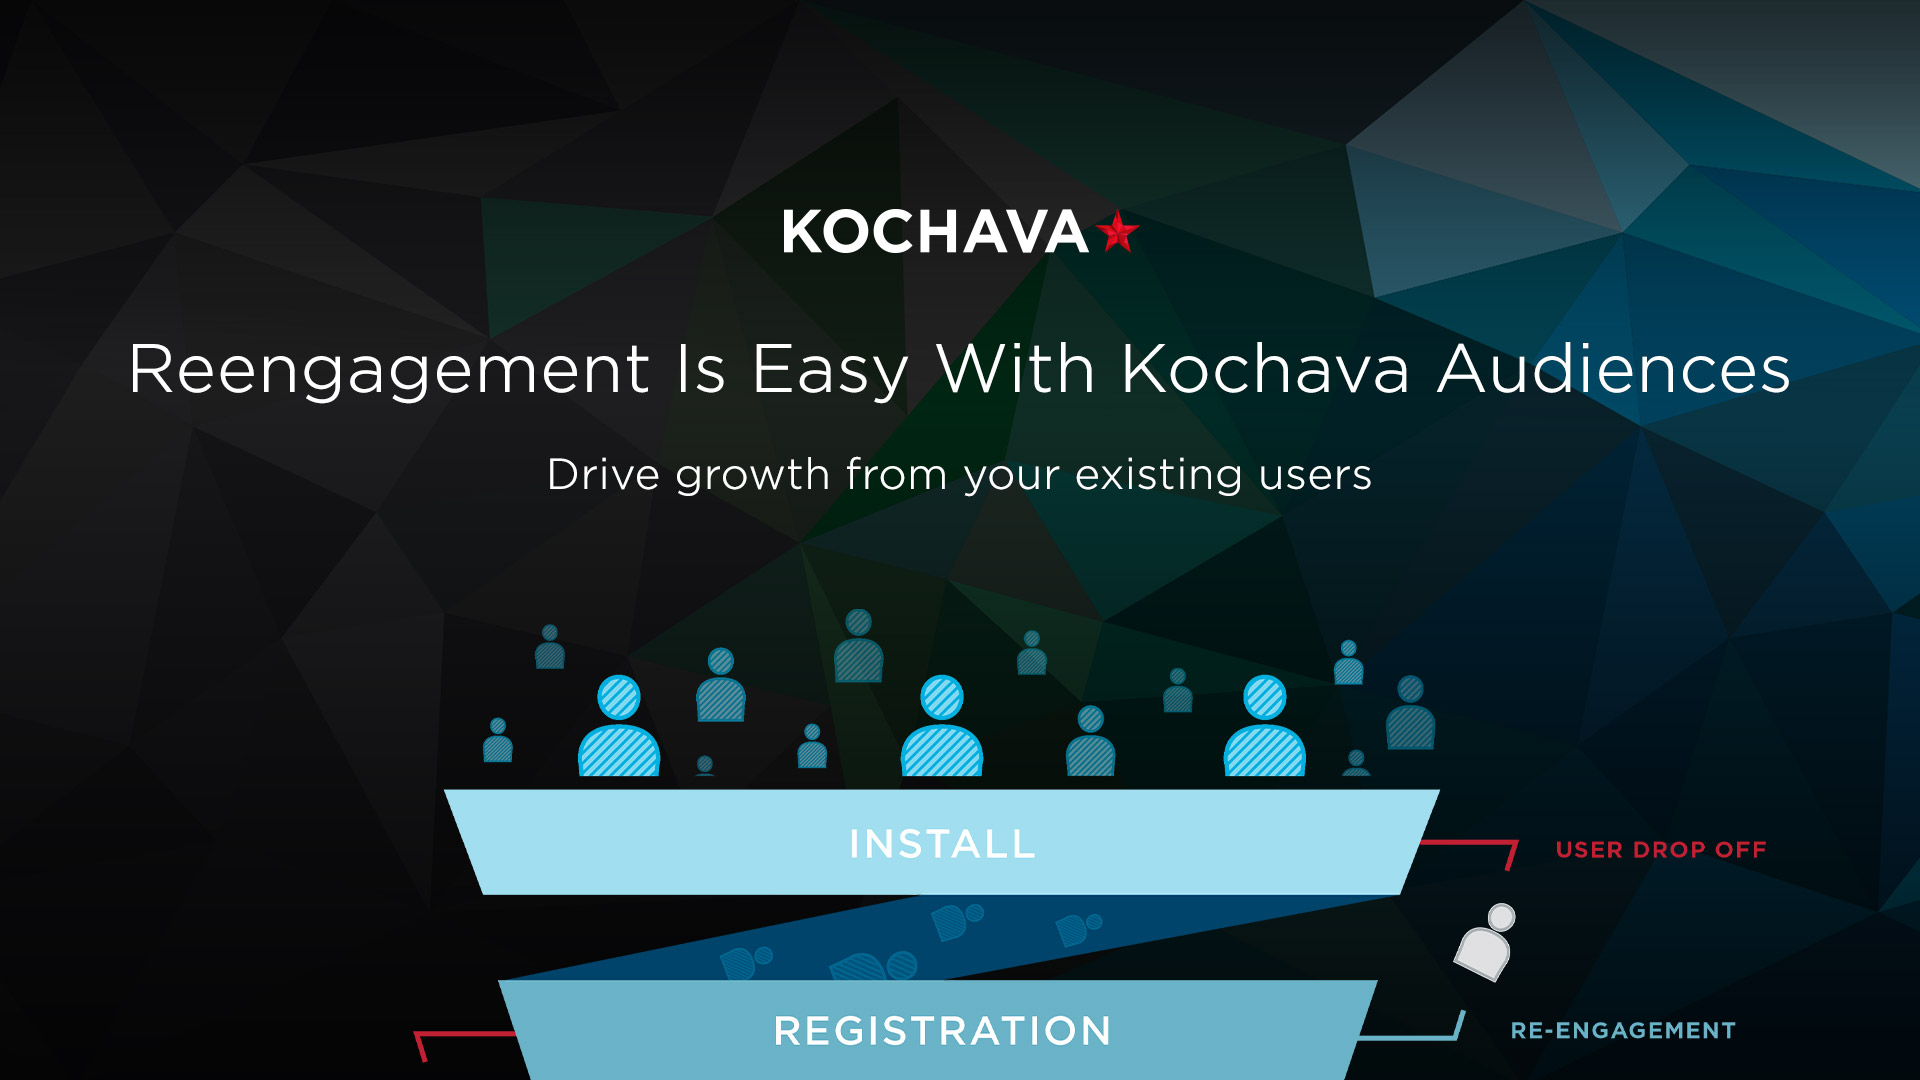 Reengagement is easy with Kochava Audiences